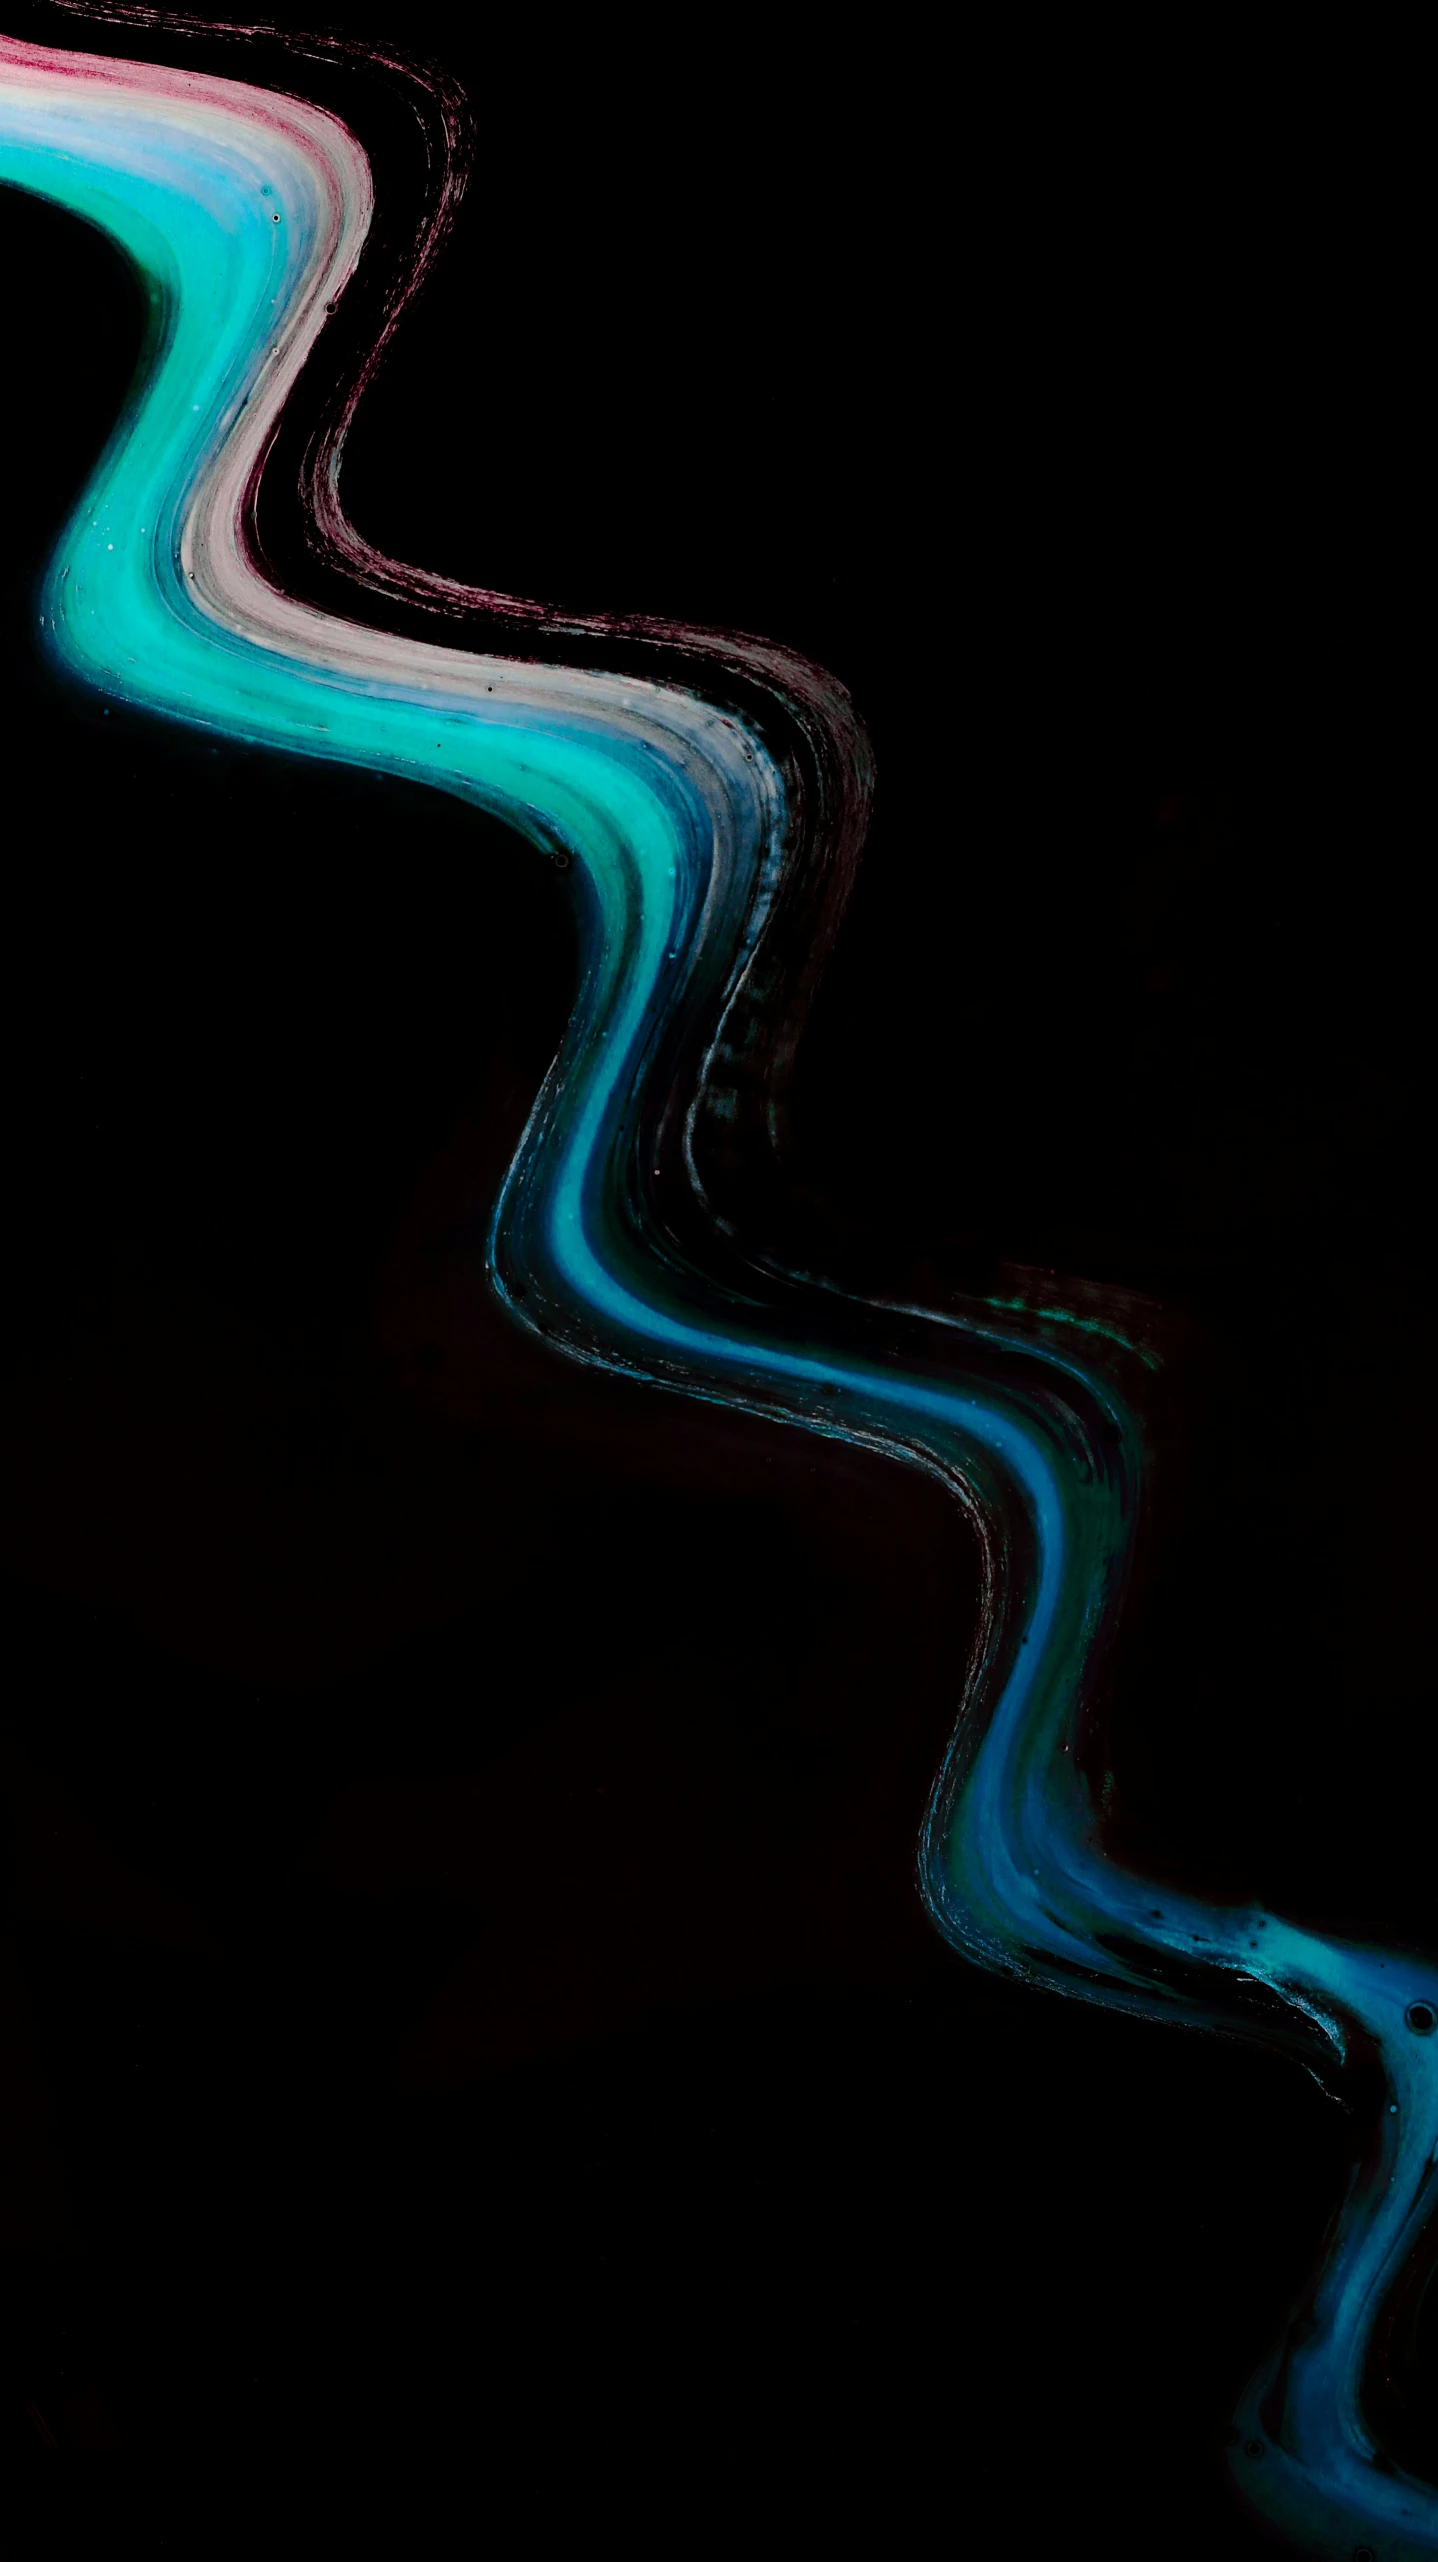 an image of abstract colors from the top